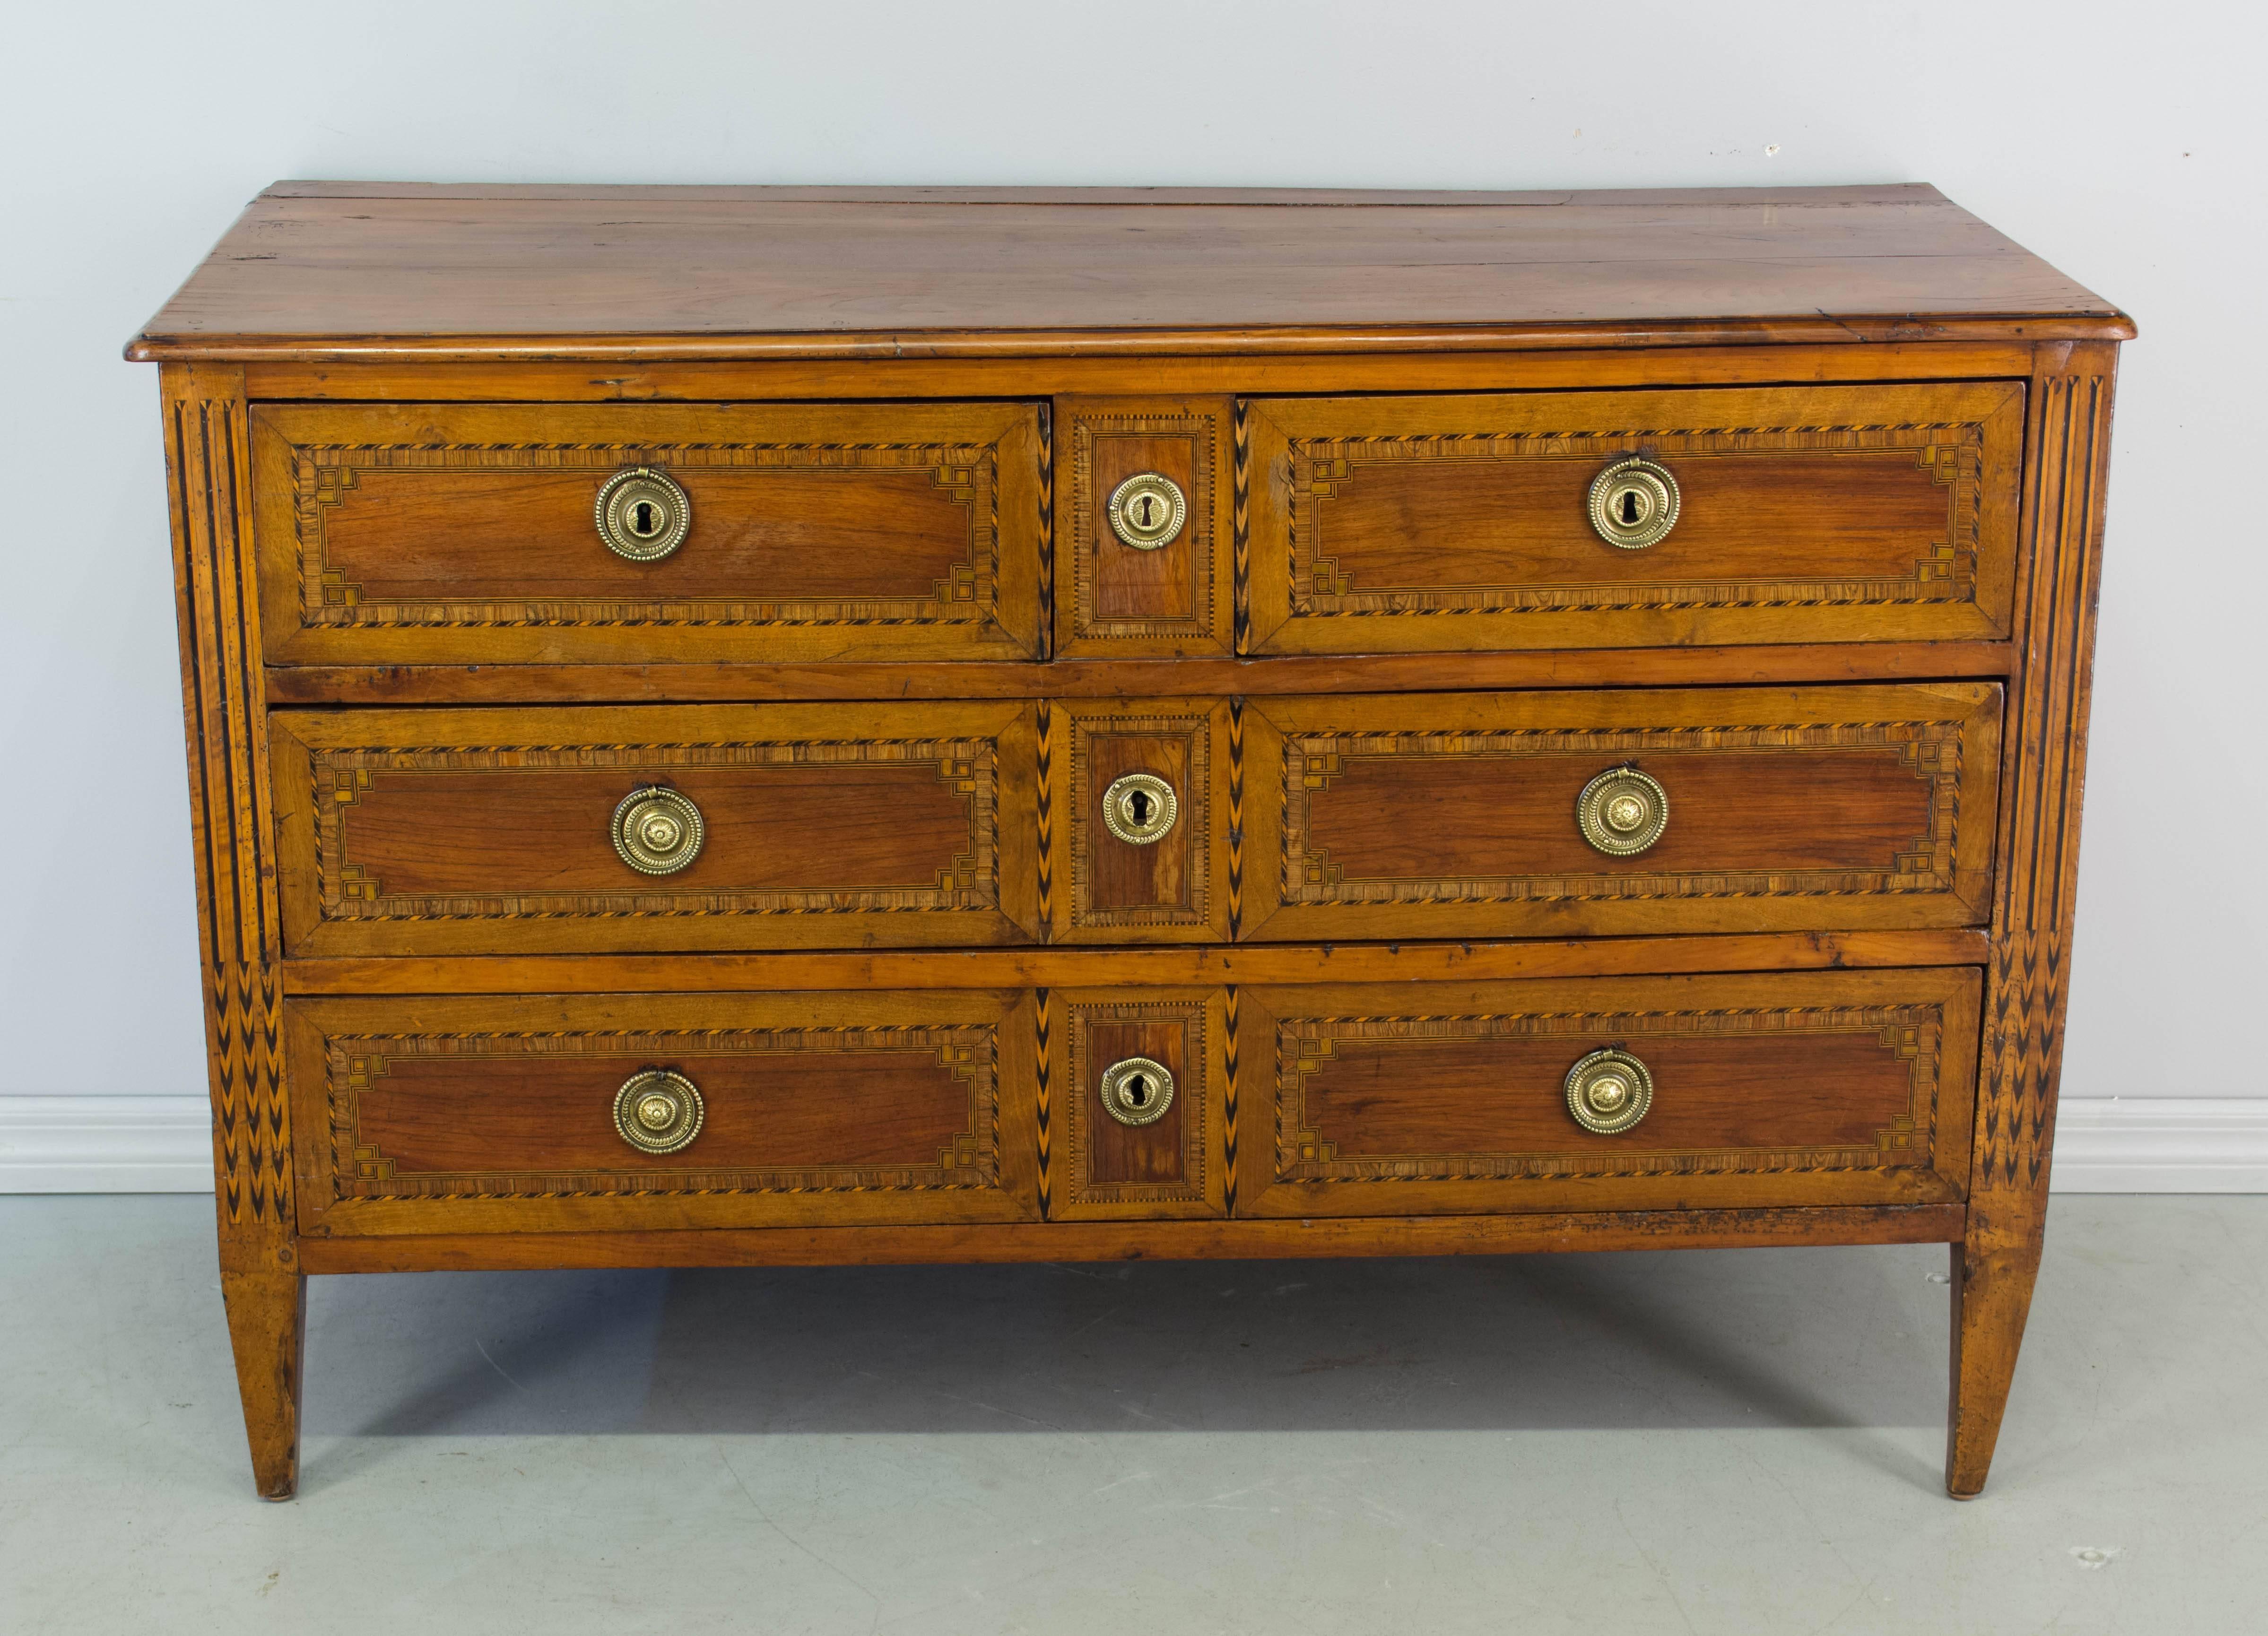 18th century Louis XVI marquetry commode made of solid cherry. Four dovetailed drawers with inlay of walnut and mahogany. Original brass hardware with locks in working order and one key. French polish finish. Oak and pine as secondary wood. Bottoms